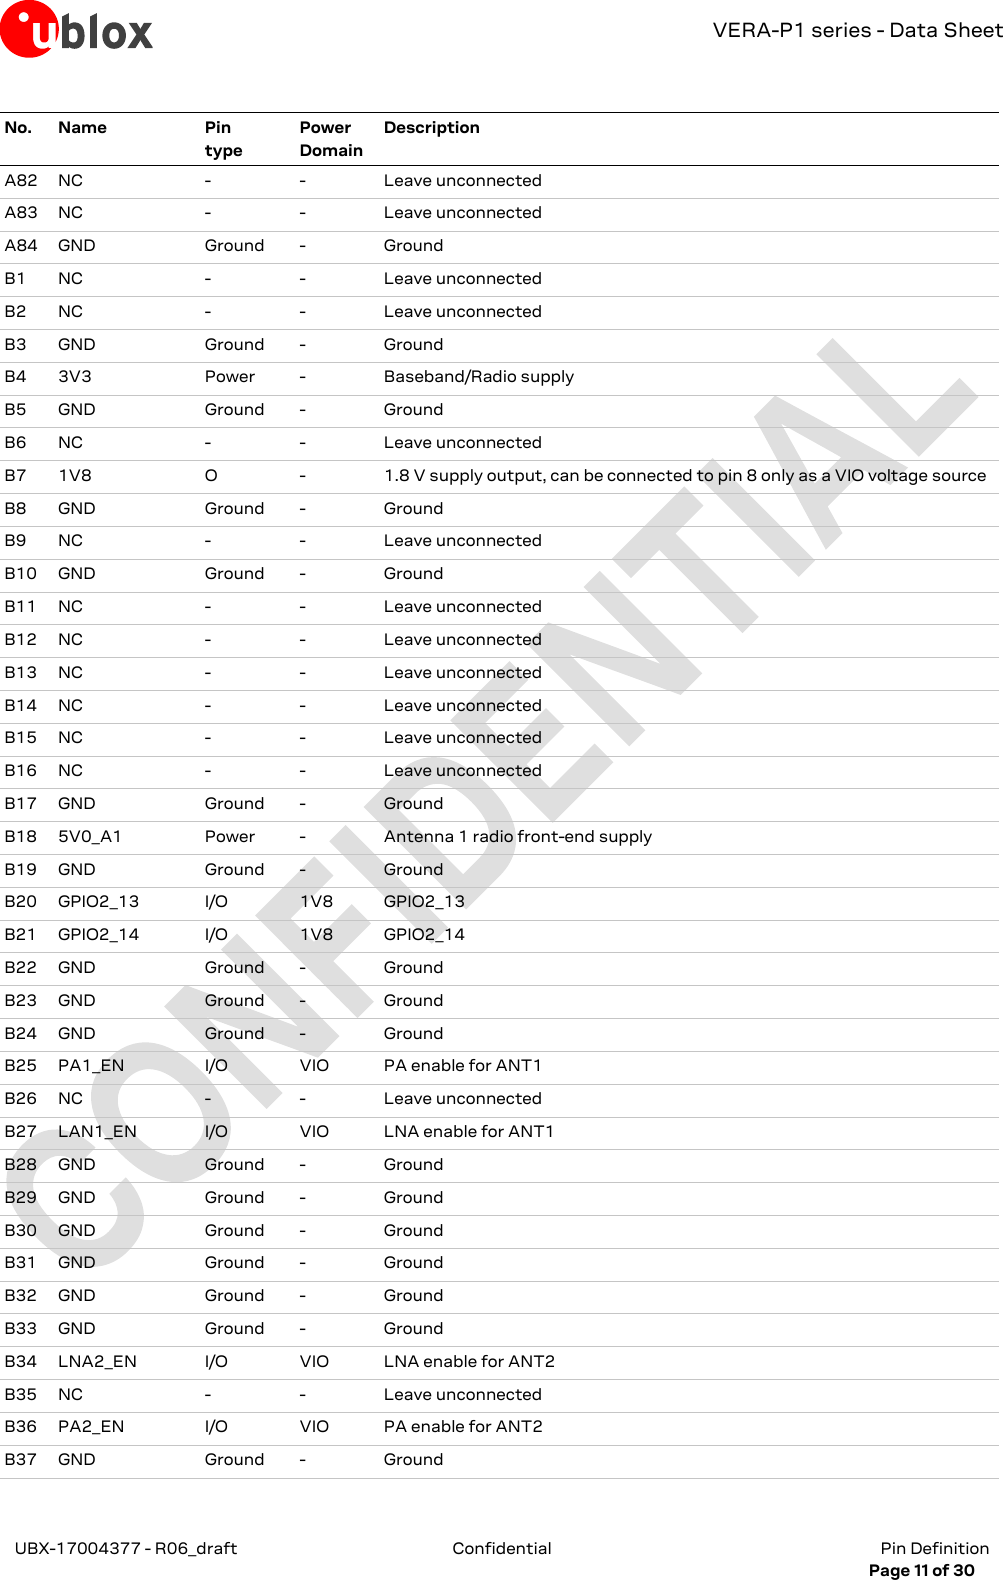 VERA-P1 series - Data Sheet UBX-17004377 - R06_draft Confidential  Pin Definition     Page 11 of 30 No. Name Pin type Power Domain Description A82 NC - - Leave unconnected A83 NC - - Leave unconnected A84 GND Ground - Ground B1 NC - - Leave unconnected B2 NC - - Leave unconnected B3 GND Ground - Ground B4 3V3 Power - Baseband/Radio supply B5 GND Ground - Ground B6 NC - - Leave unconnected B7 1V8 O - 1.8 V supply output, can be connected to pin 8 only as a VIO voltage source B8 GND Ground - Ground B9 NC - - Leave unconnected B10 GND Ground - Ground B11 NC - - Leave unconnected B12 NC - - Leave unconnected B13 NC - - Leave unconnected B14 NC - - Leave unconnected B15 NC - - Leave unconnected B16 NC - - Leave unconnected B17 GND Ground - Ground B18 5V0_A1 Power - Antenna 1 radio front-end supply B19 GND Ground - Ground B20 GPIO2_13 I/O 1V8 GPIO2_13 B21 GPIO2_14 I/O 1V8 GPIO2_14 B22 GND Ground - Ground B23 GND Ground - Ground B24 GND Ground - Ground B25 PA1_EN I/O VIO PA enable for ANT1 B26 NC - - Leave unconnected B27 LAN1_EN I/O VIO LNA enable for ANT1 B28 GND Ground - Ground B29 GND Ground - Ground B30 GND Ground - Ground B31 GND Ground - Ground B32 GND Ground - Ground B33 GND Ground - Ground B34 LNA2_EN I/O VIO LNA enable for ANT2 B35 NC - - Leave unconnected B36 PA2_EN I/O VIO PA enable for ANT2 B37 GND Ground - Ground 